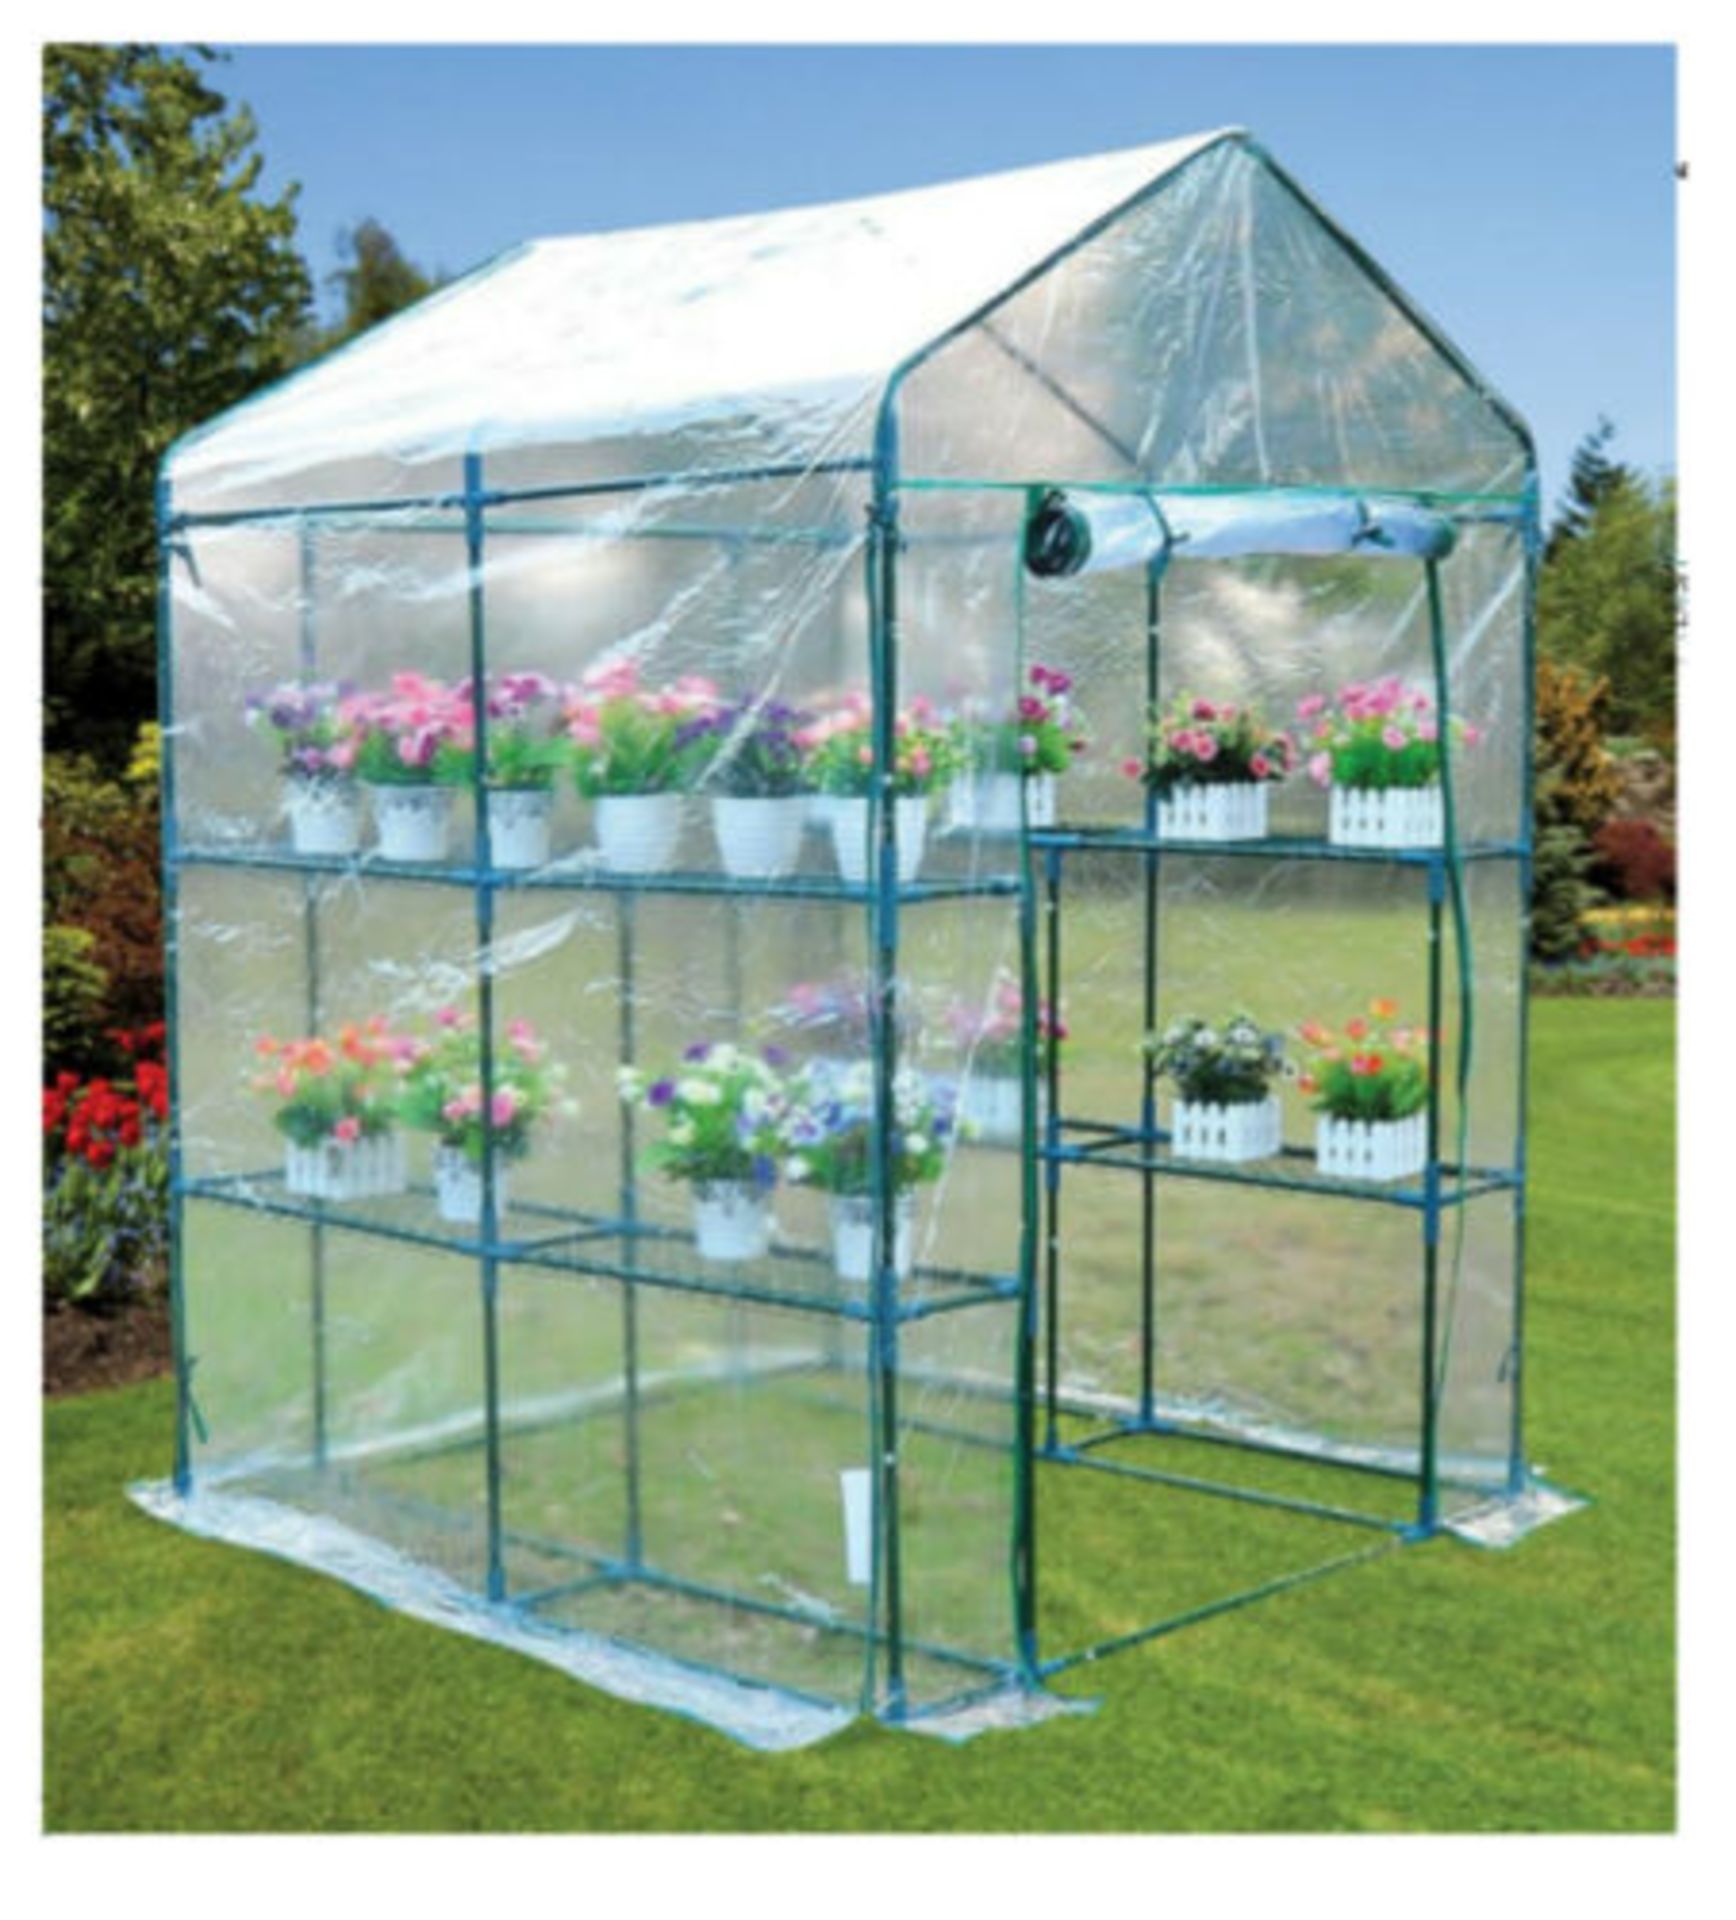 V Brand New Walk-in Greenhouse With 8 Shelves And Zip Cover - Approximately 143x143x195cm - Ideal